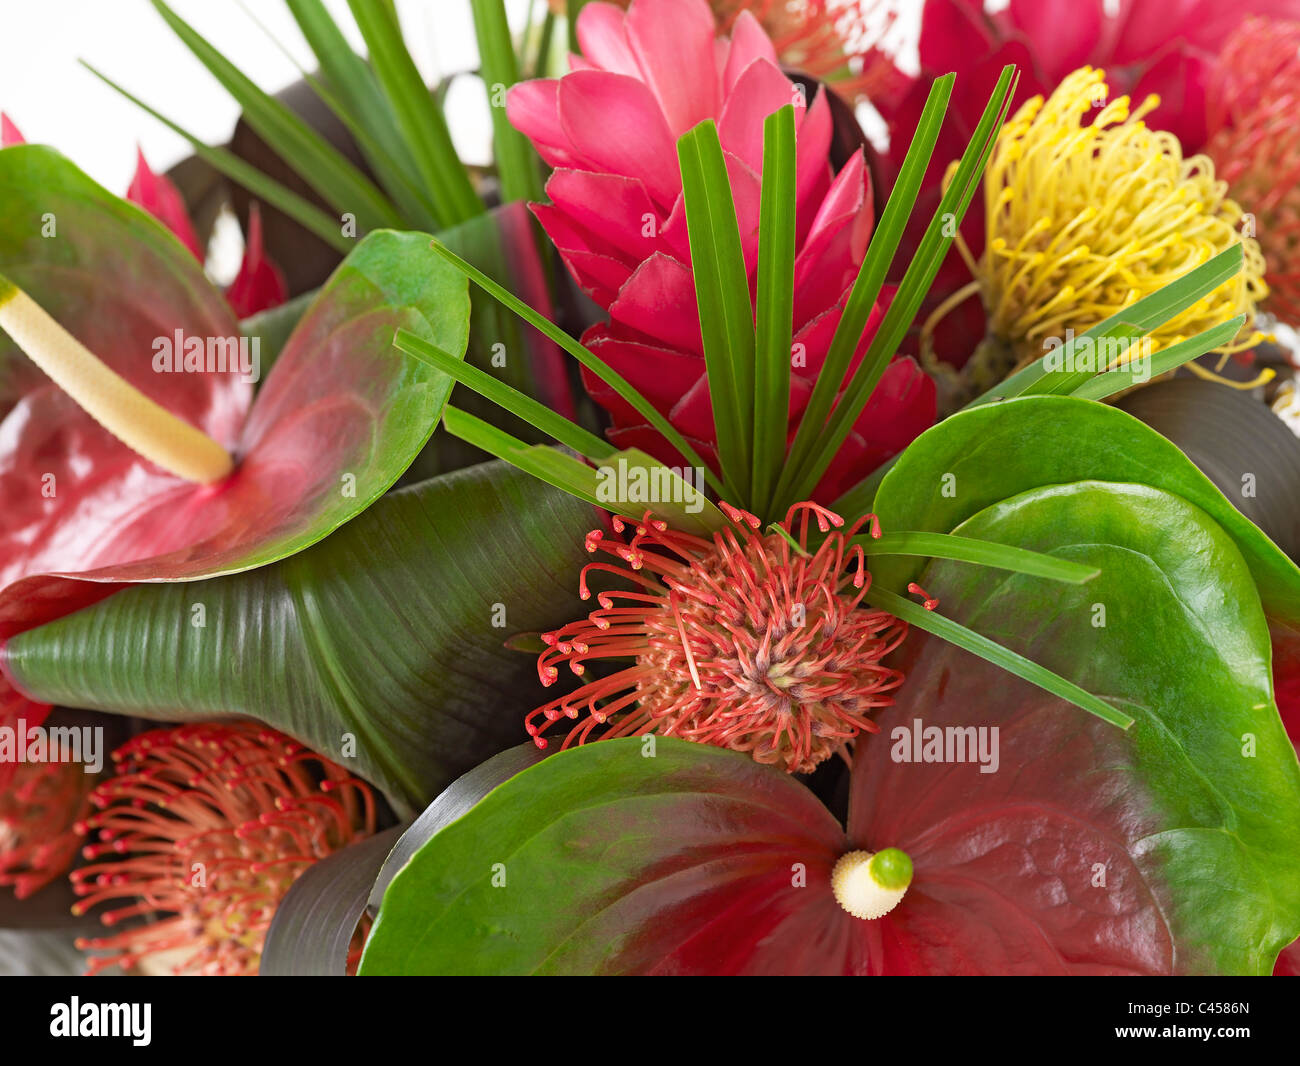 Red flower bouquet including anthurium (flamingo lily), heliconia and red ginger lily, close-up Stock Photo